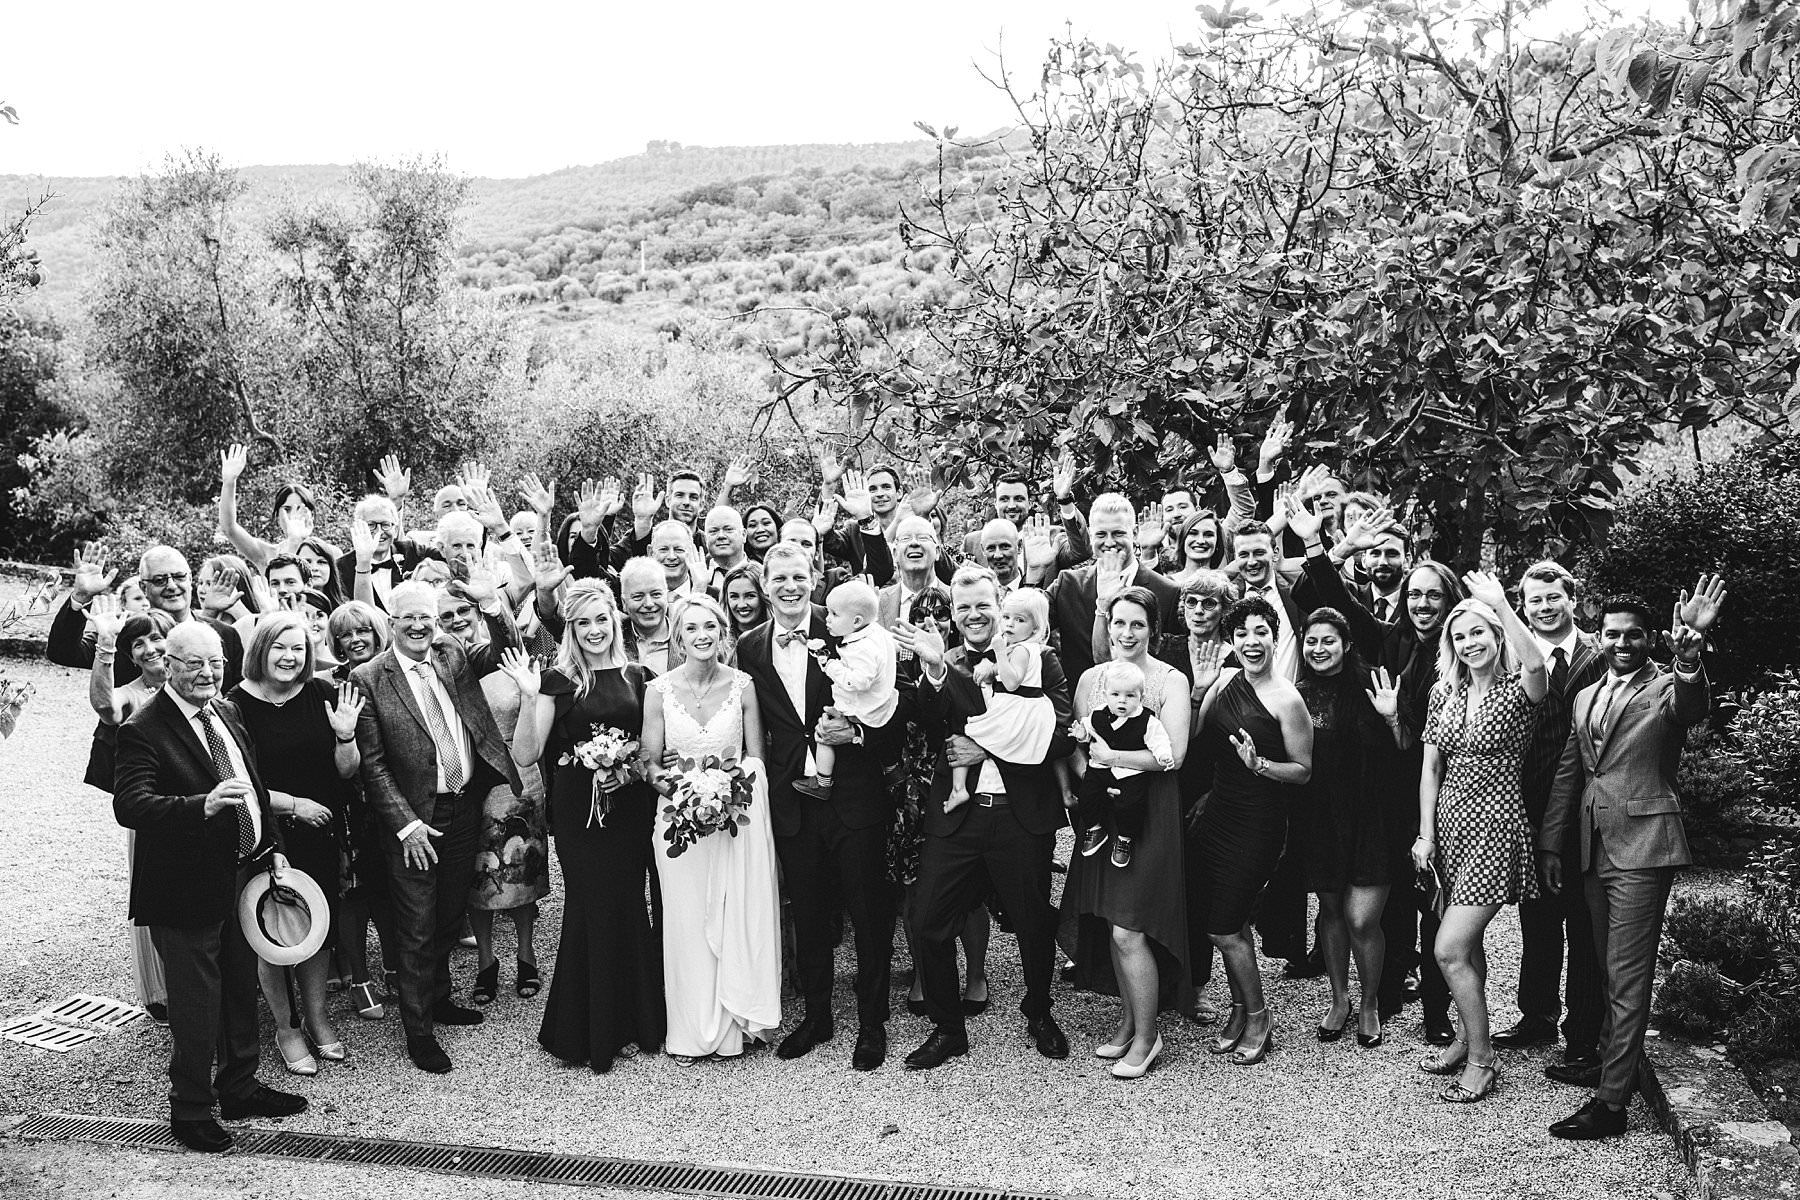 An unforgettable international wedding. This elegant couple from Sydney was dreaming of a unique happening. In order to do so, they invited 50 guests who reached Umbria from all corners of the Earth. They were happy to do that: the whole family is very close and they didn’t want to miss this meaningful milestone. All aunts and uncles from both sides were there, and even the groom’s grandfather. He even got his first passport especially to be able to join this international wedding! The witnesses of J&J’s love, belonging to 9 different nationalities, came to Umbria from 6 countries. That’s what made this celebration so unique and significant to the bride and groom: they were honored to have by their side all of those people, most of whom they meet very rarely due to the distance